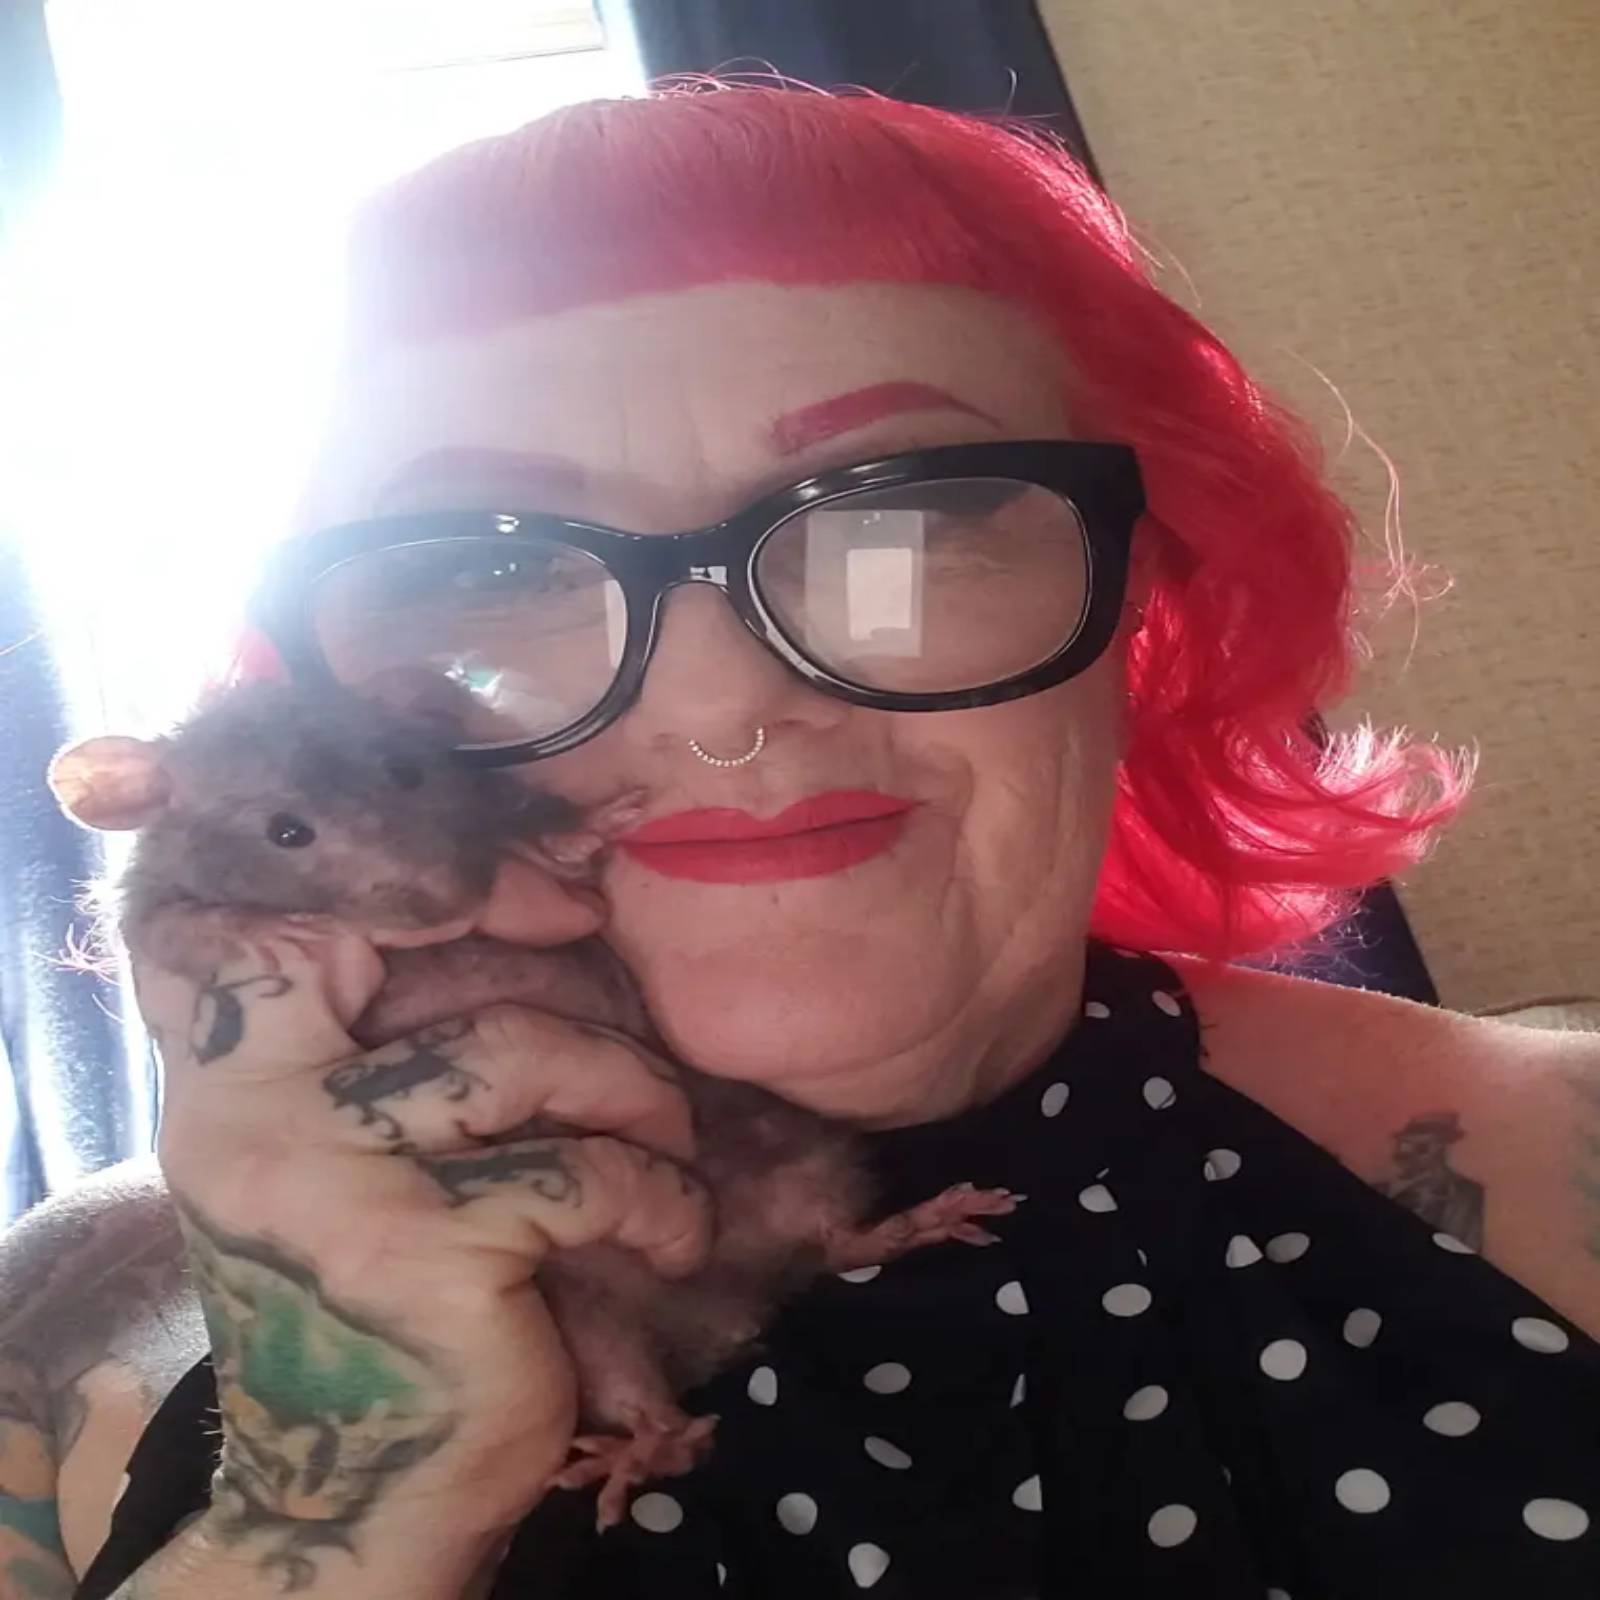 Woman Has 50 Pet Rats, Pet Rats, Michele Raybon, Woman Calls Pet Rats Babies, Pets, Woman Calls Pet Rats Babies, Pets and Owners, Viral On Internet, Trending News